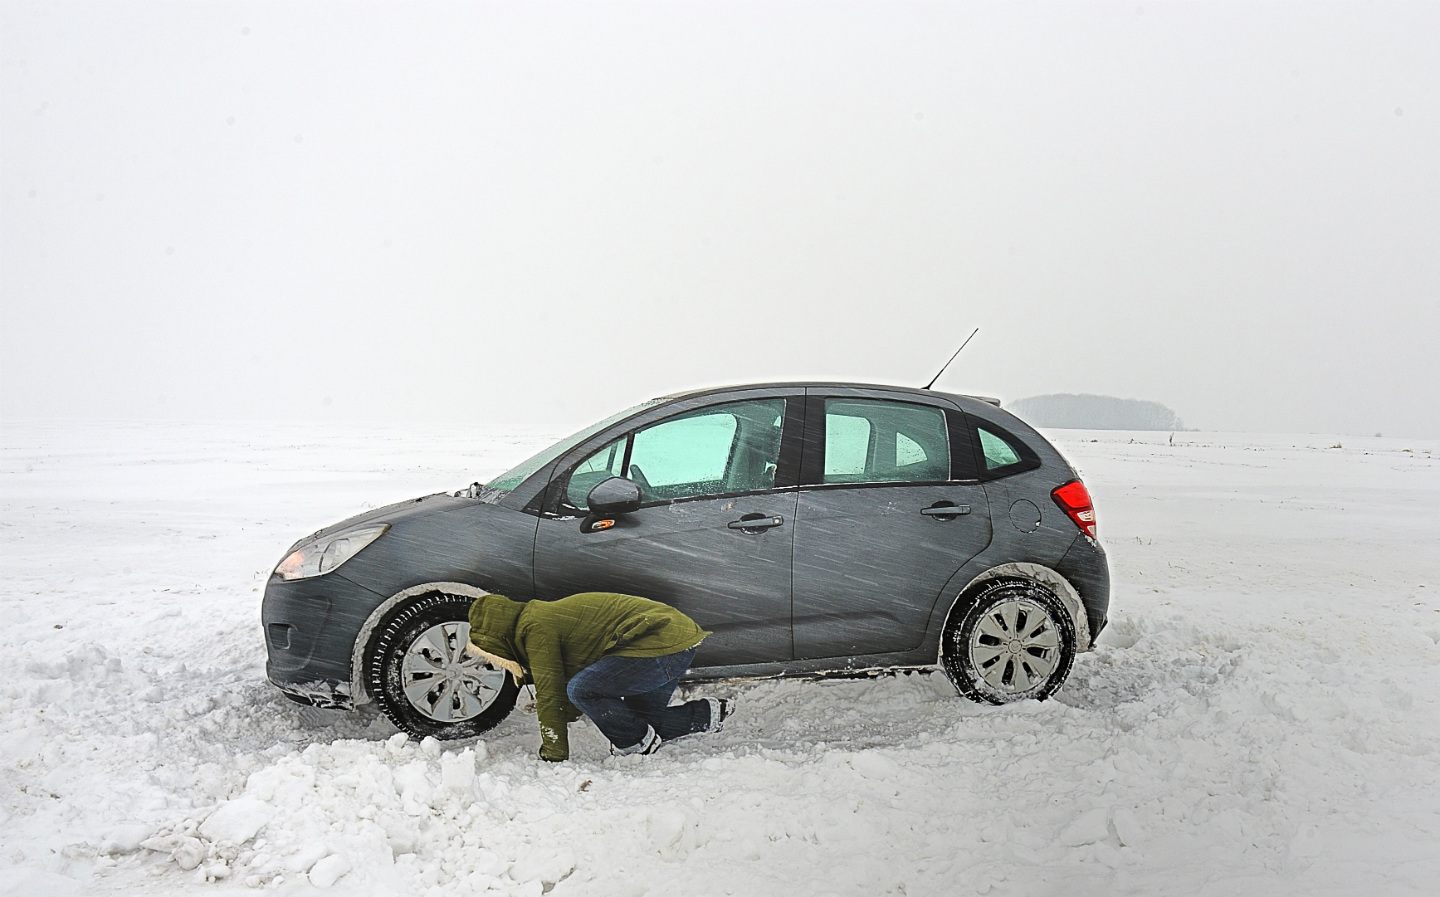 Snow joke: 10 steps to follow if your car gets stuck in snow